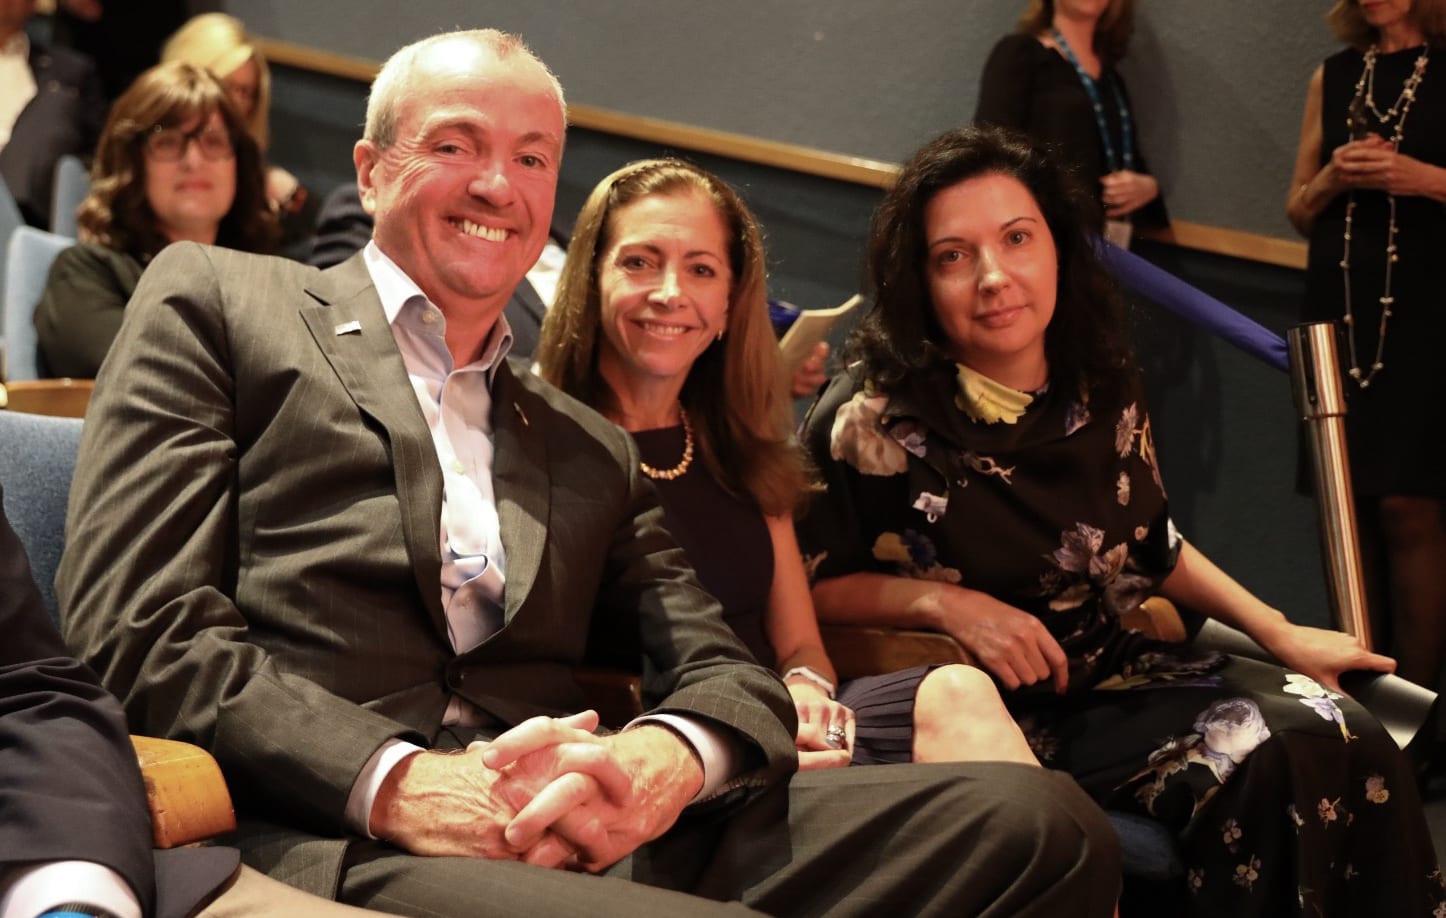 Irina Nevzlin Chair of the Board of Directors of The Museum of the Jewish People at Beit Hatfutsot, and President of the Nadav Foundation, Tami and Phil Murphy the Governor of New Jersey at the event held at Museum of the Jewish people at Beit Hatfutsot (Photo: Edwin Torres)